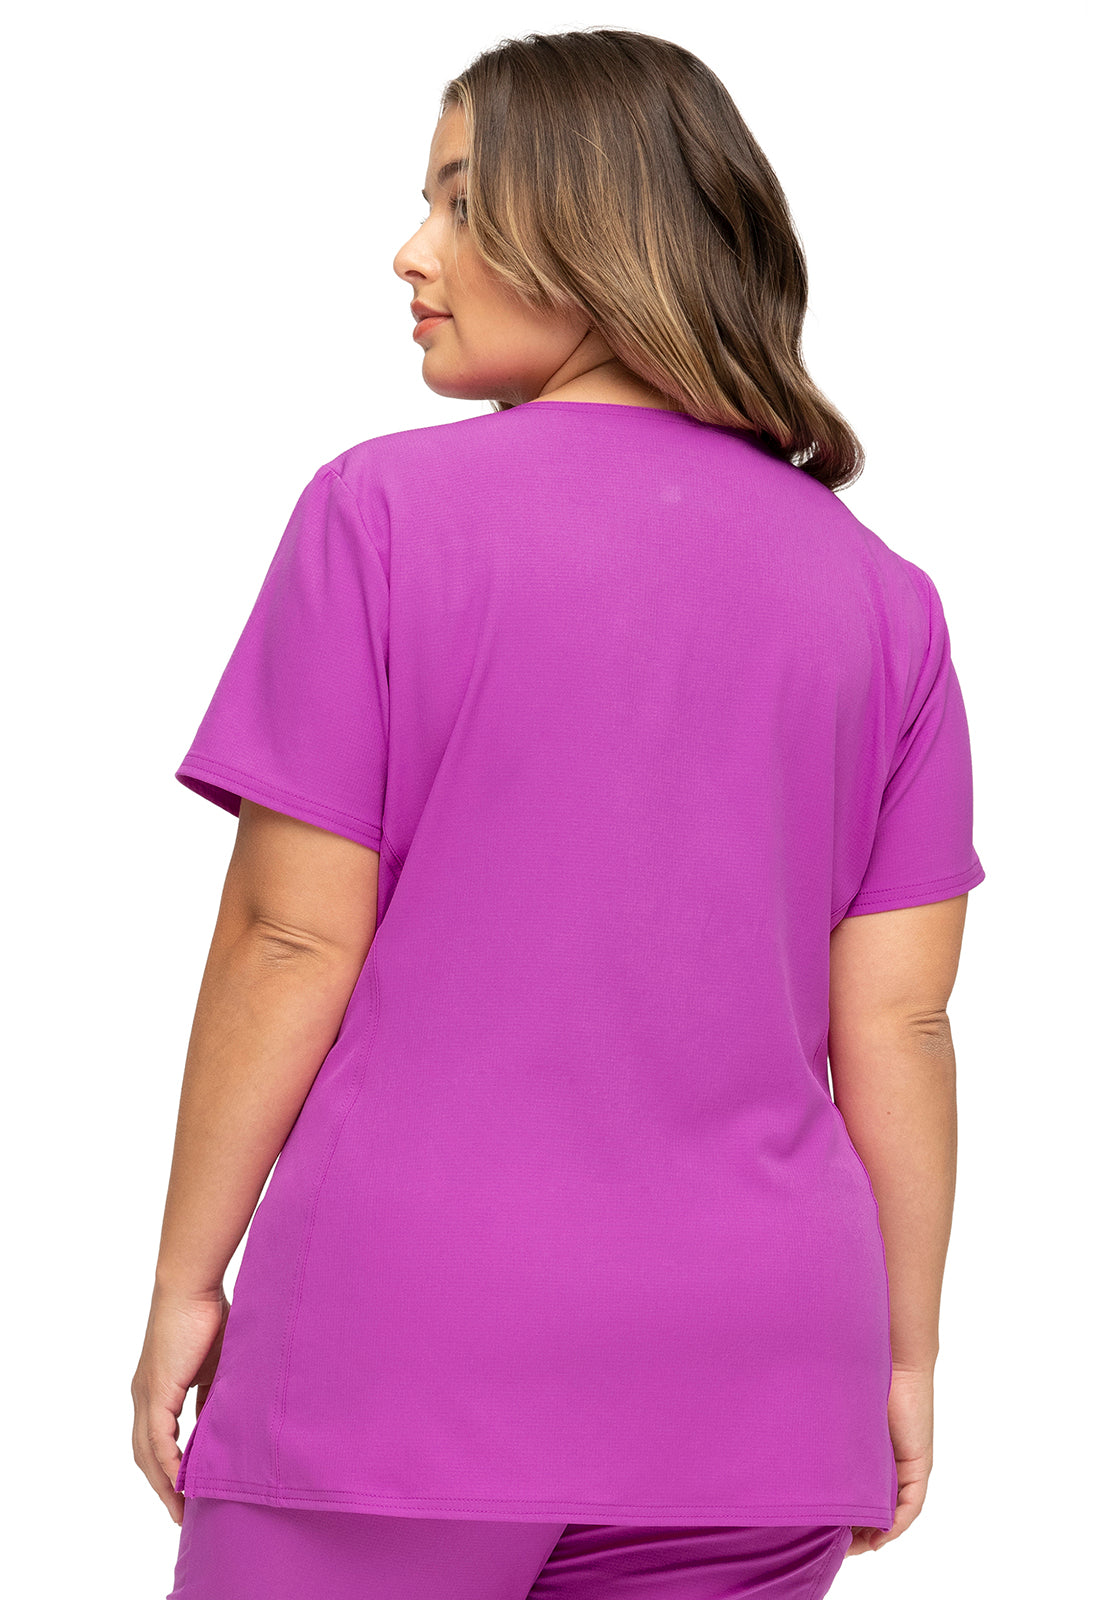 Shaped V-Neck Top in Berry Blast Heart 20710